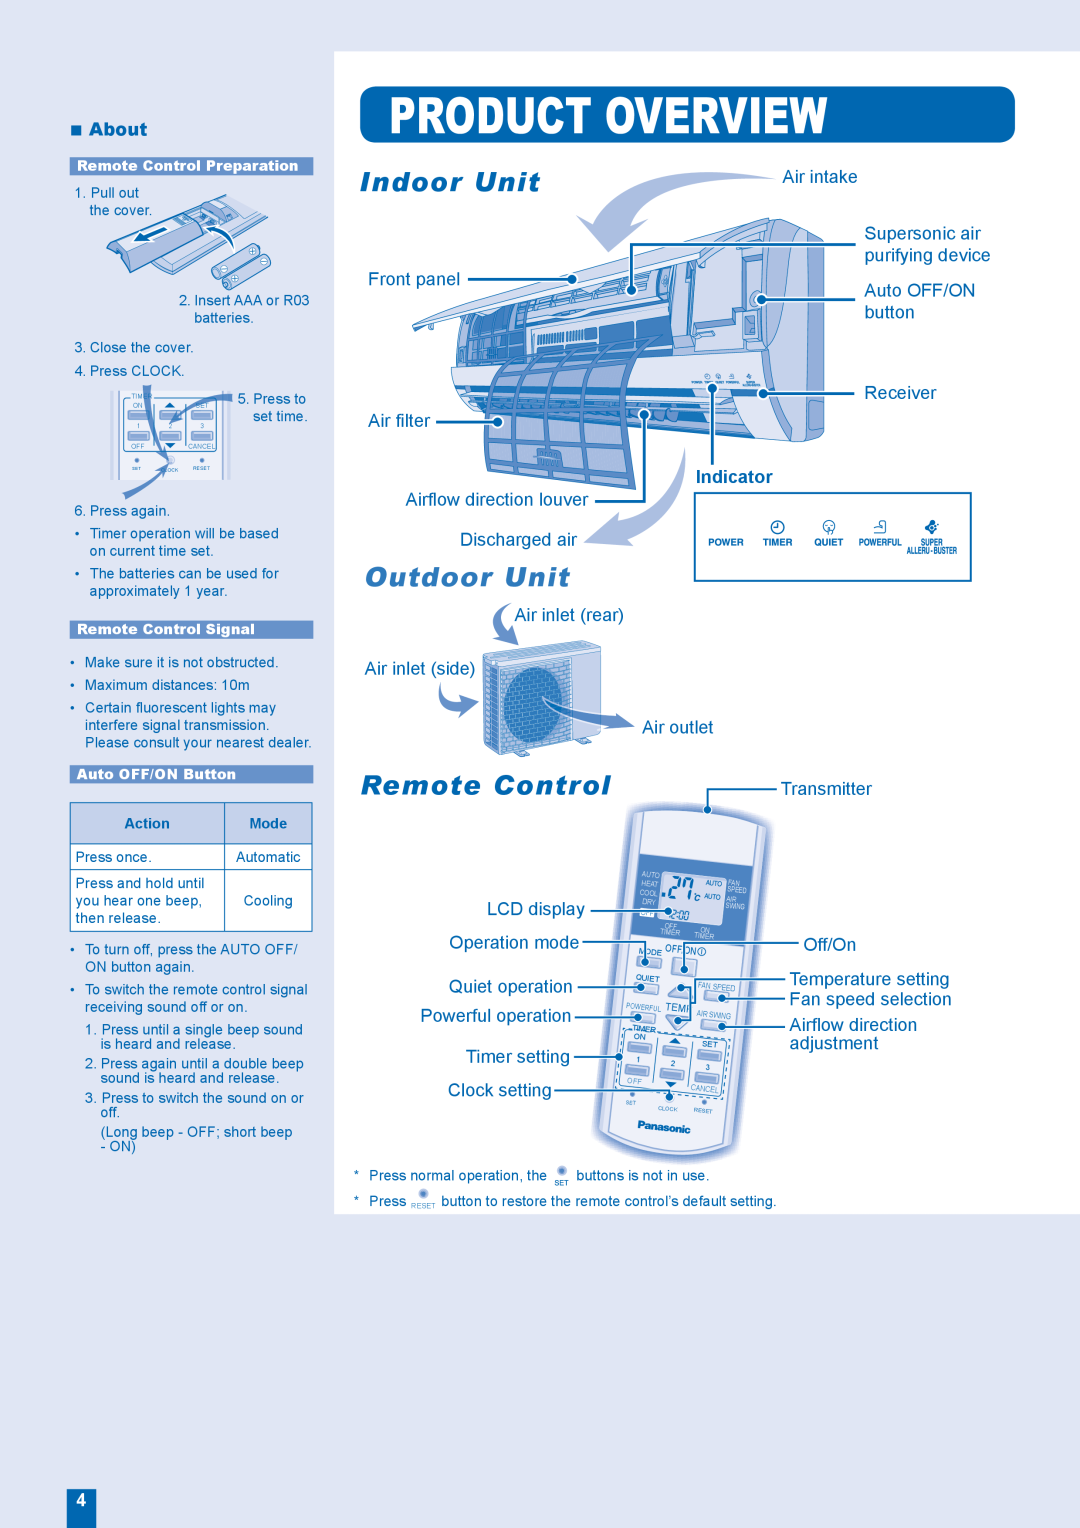 Panasonic CU-W12EKR operating instructions Product Overview, Outdoor Unit, Indoor Unit, Remote Control, About, Indicator 